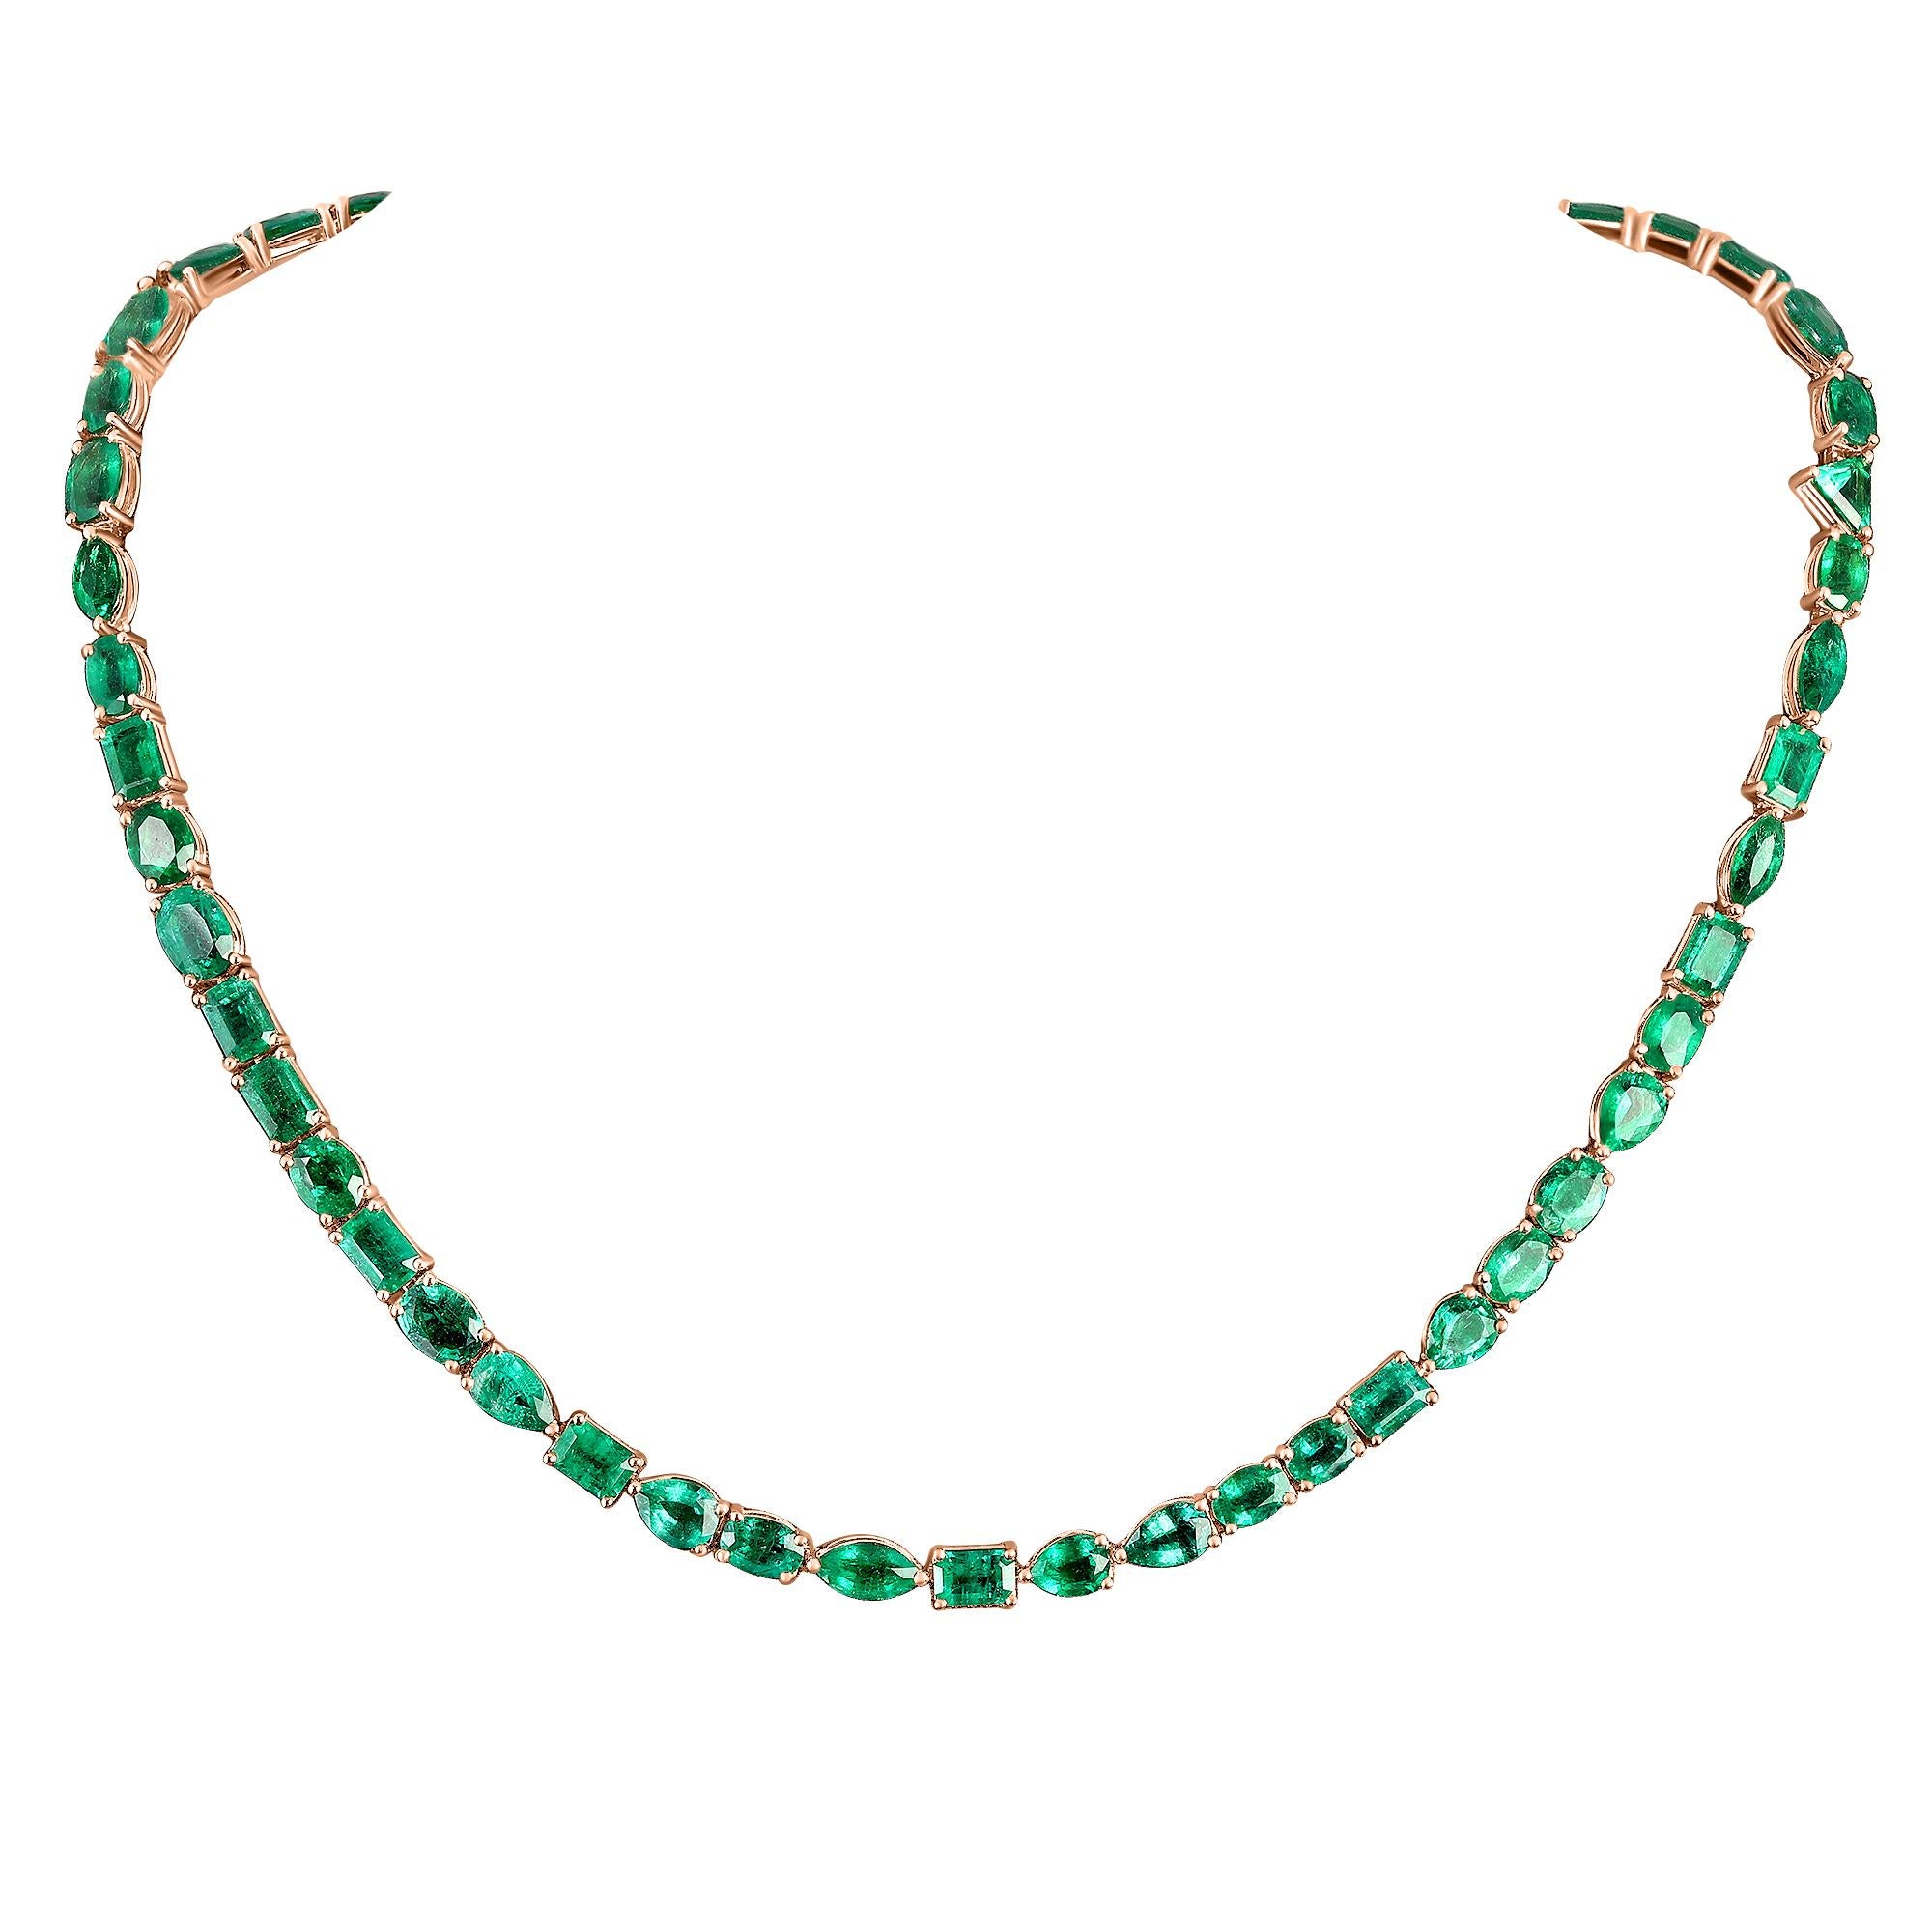 Fabulous choker with mix shape emeralds total weight 23.64 carat and 0.09ct diamond clasp.

